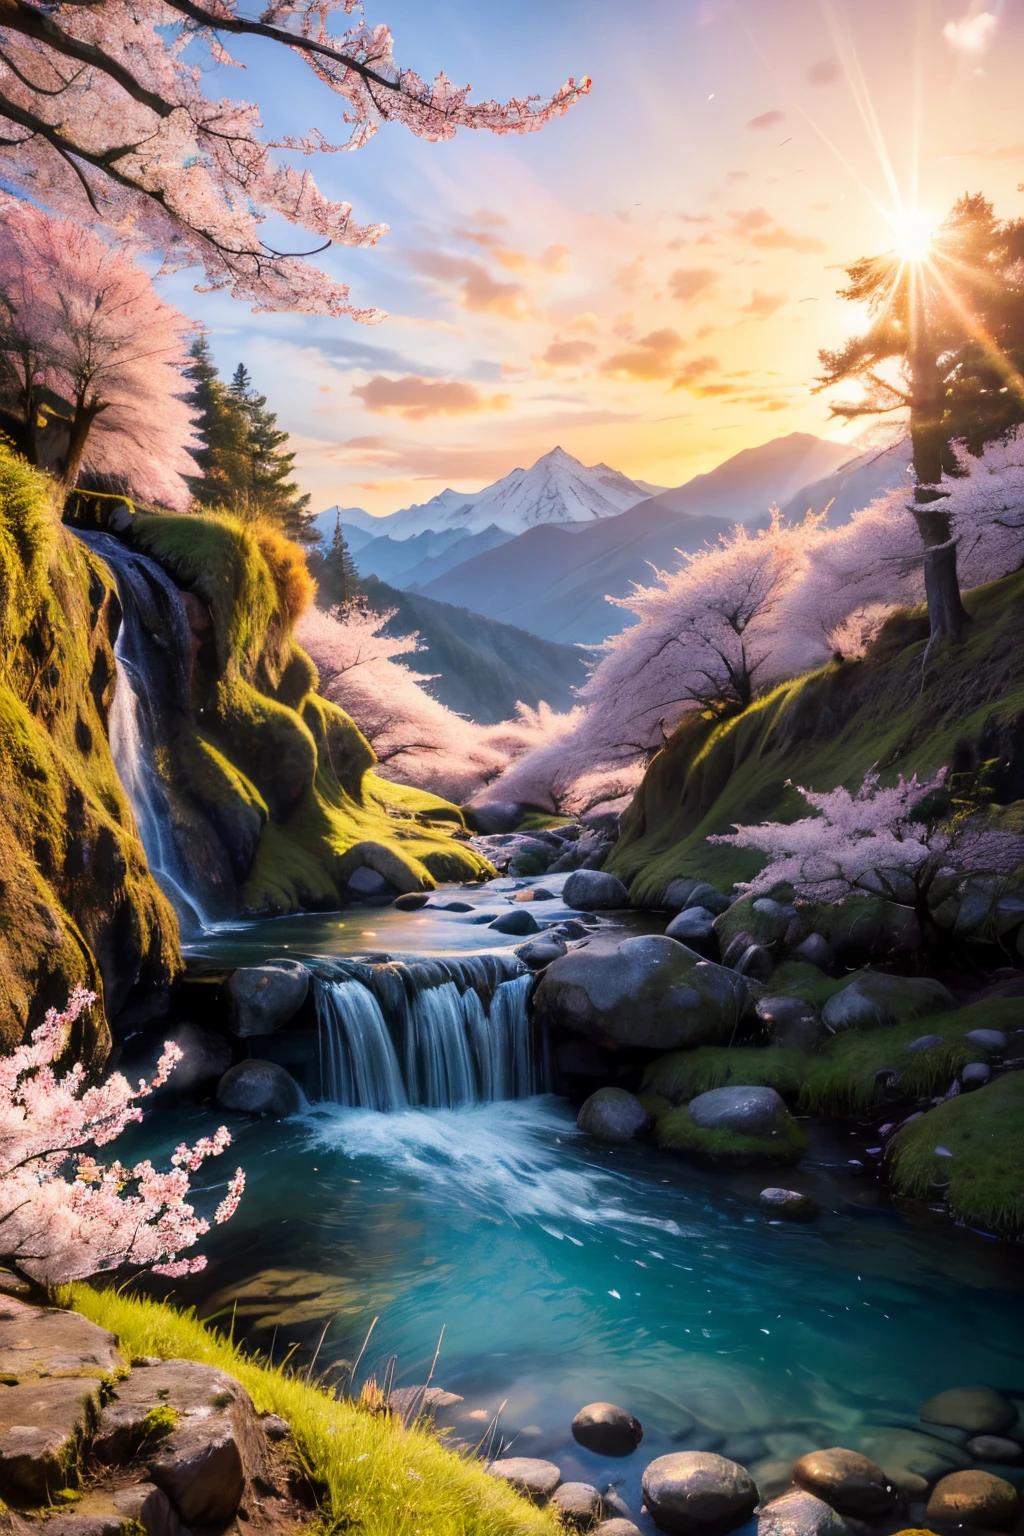 Deep forest, mountain in the distance, Flying birds. two-dimensional style, Bright and vibrant, Cherry blossoms covering the mountainside, You can see the sunrise in the distance, The creek meanders, There are several daffodils in the bank, sunrises